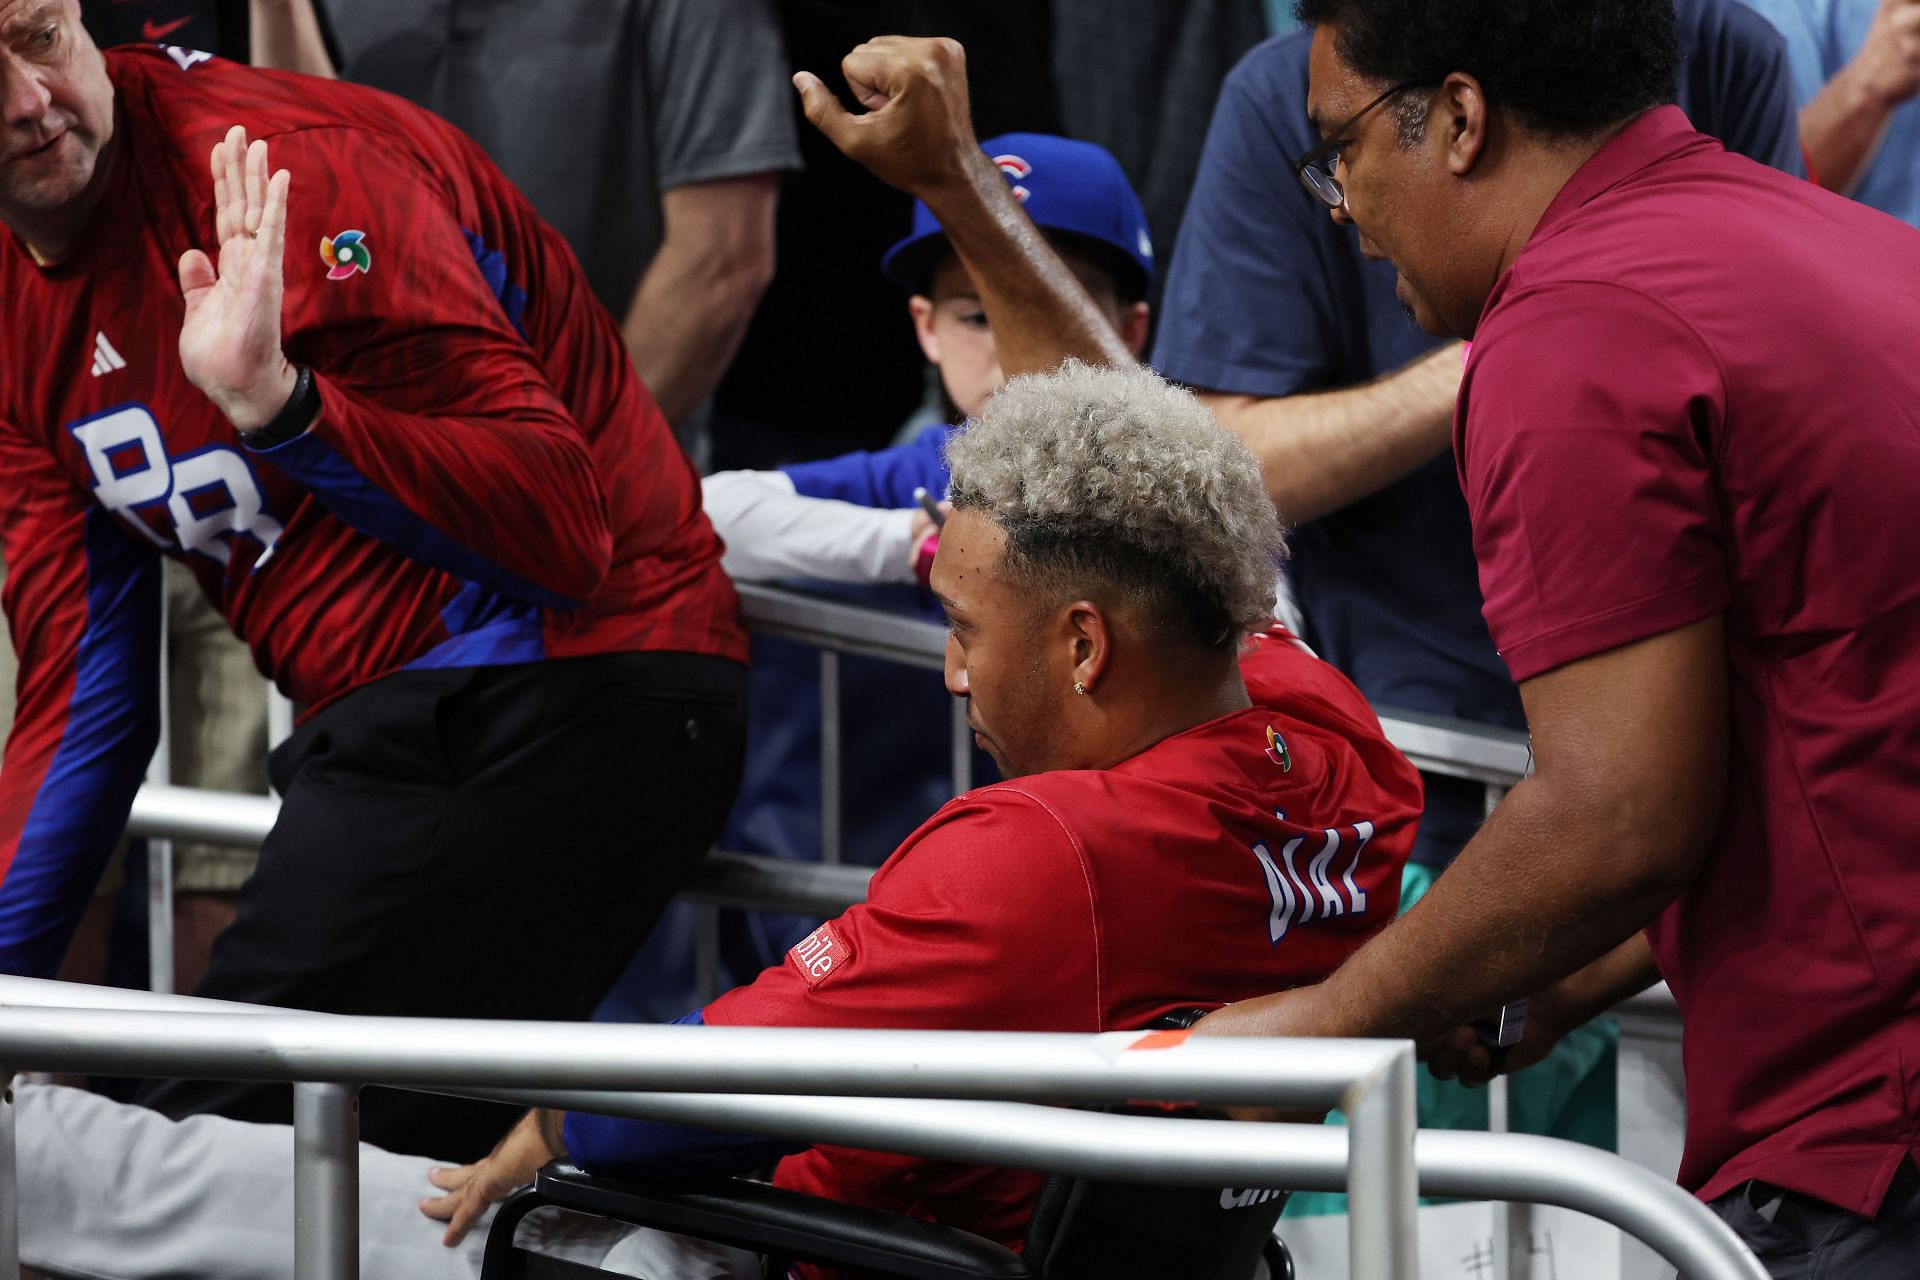 Edwin Diaz of Team Puerto Rico leaves the field in a wheelchair after sustaining an injury.